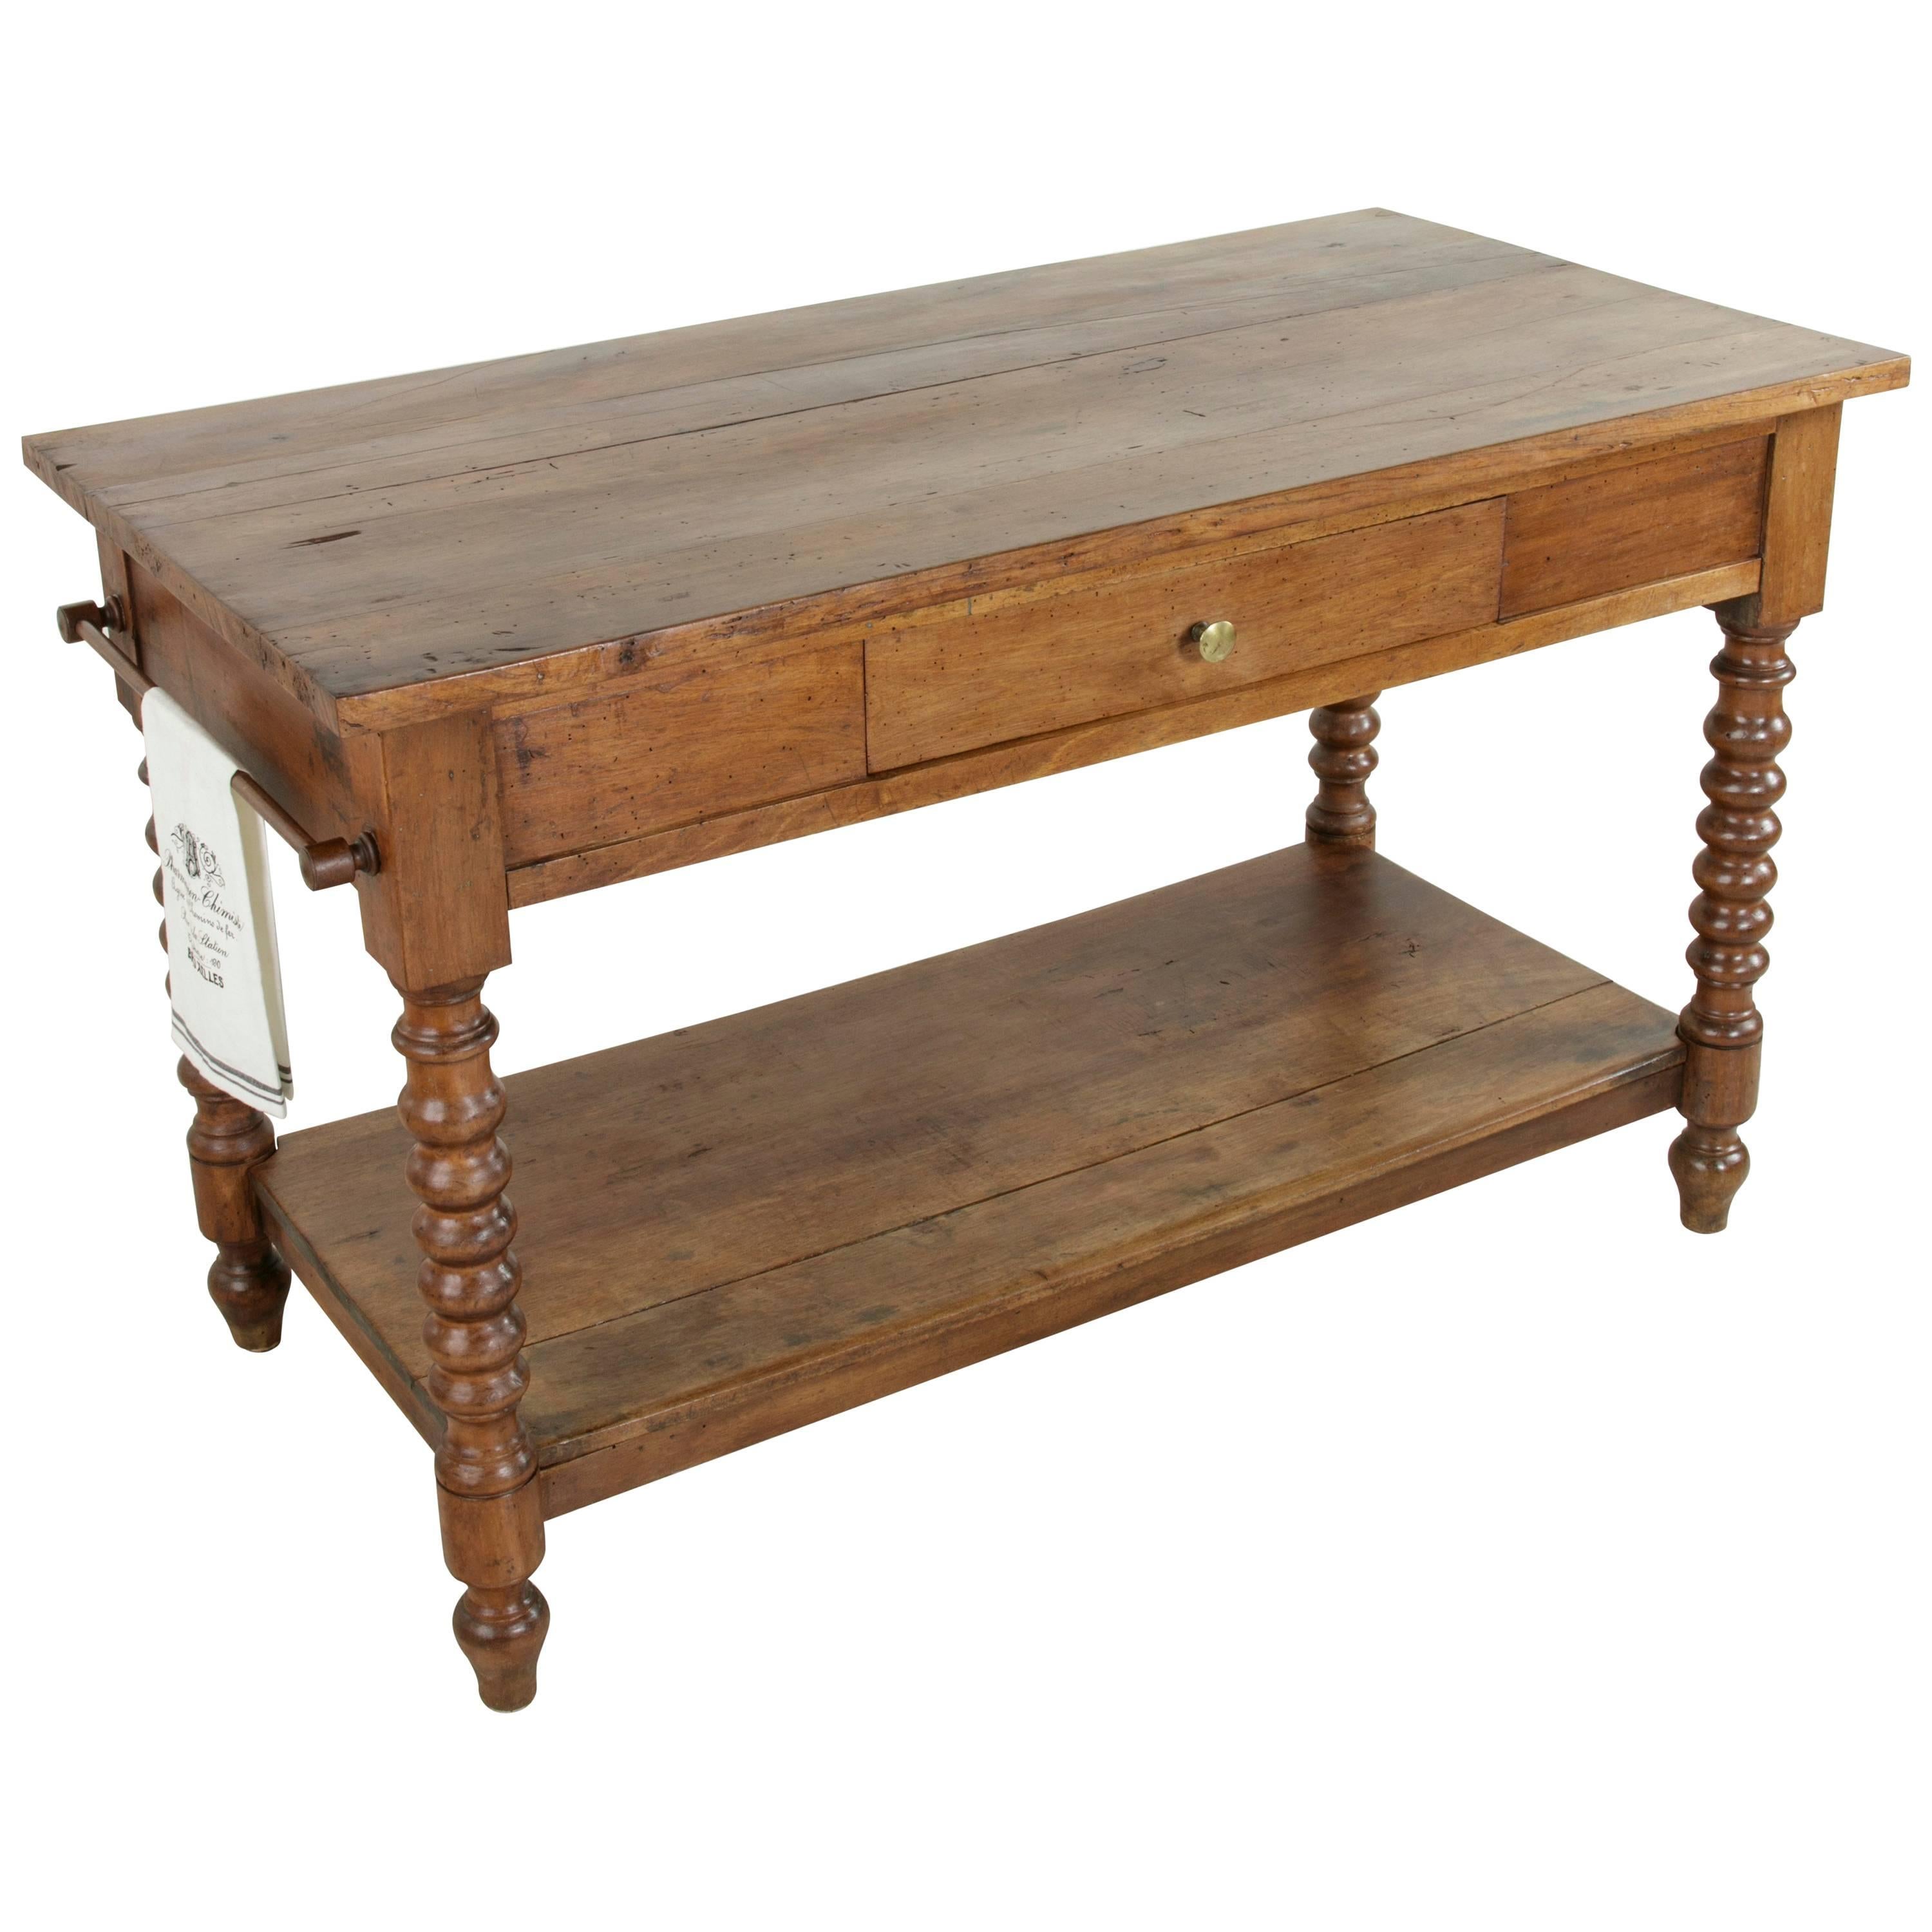 19th Century French Walnut Draper's Table or Kitchen Island with Drawer